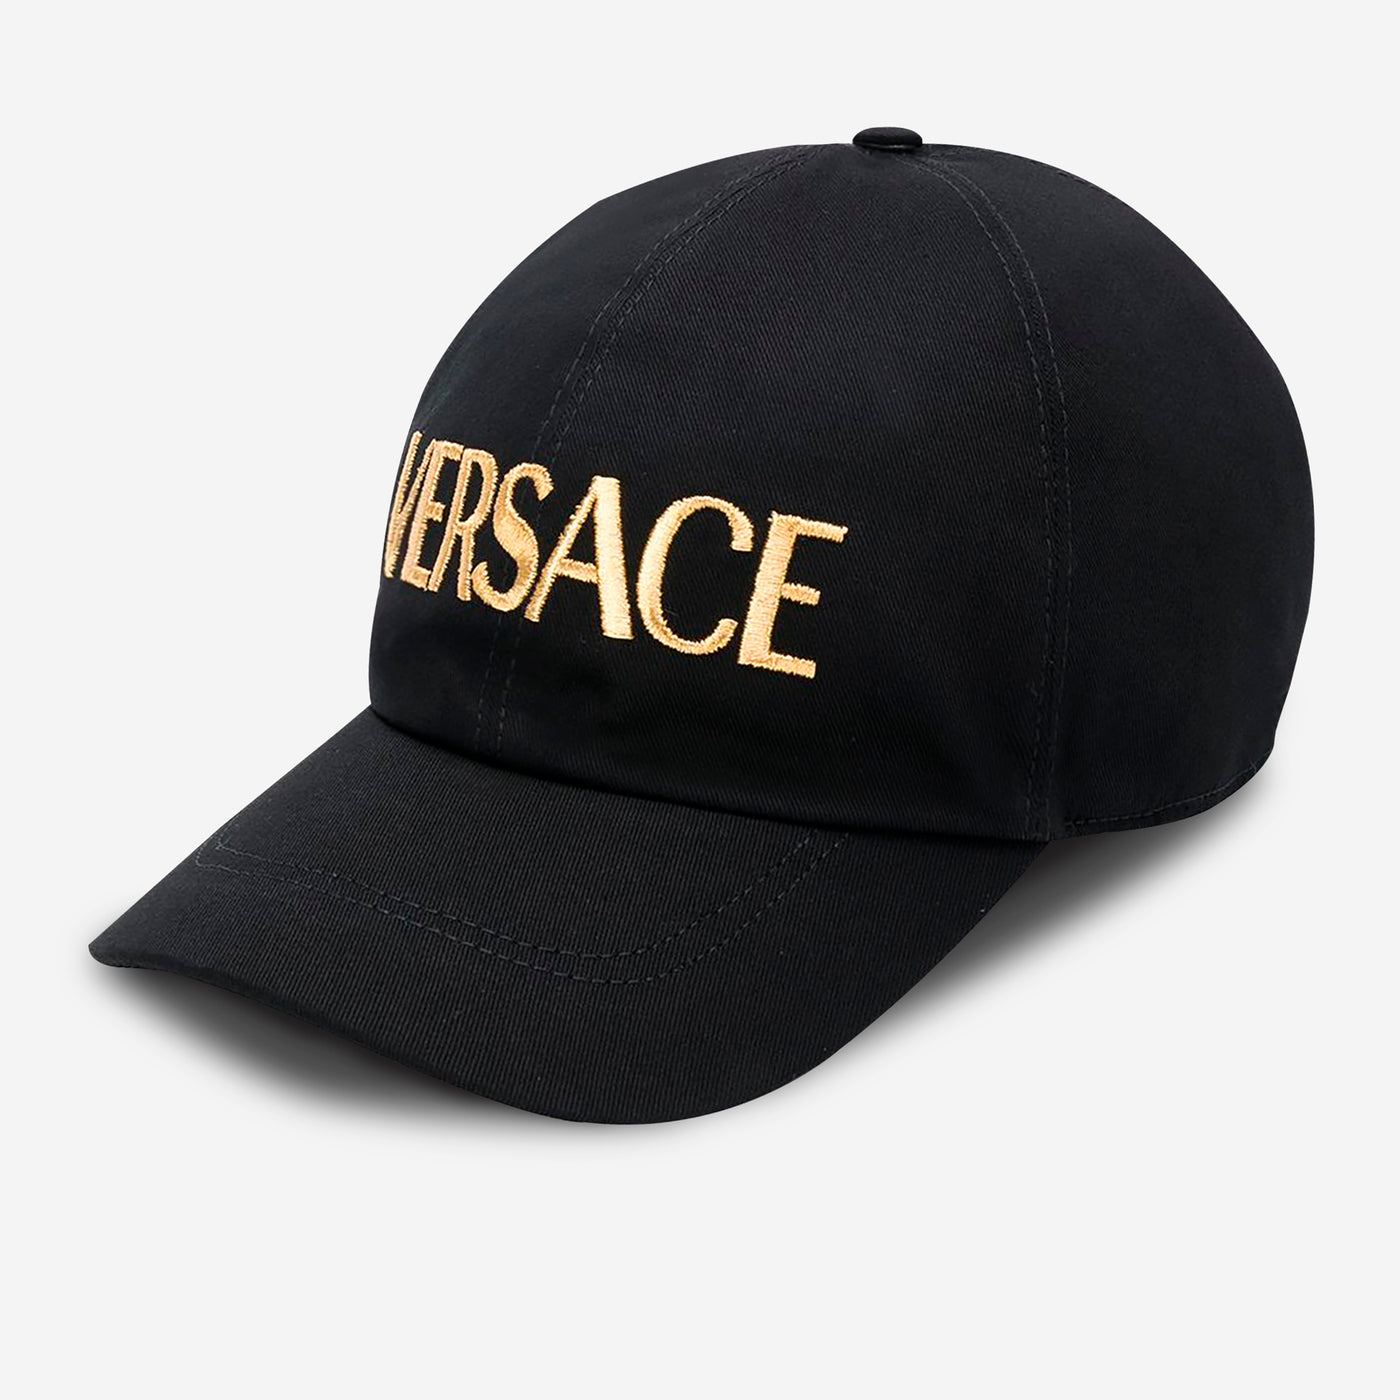 Versace Embroidered Logo Cap